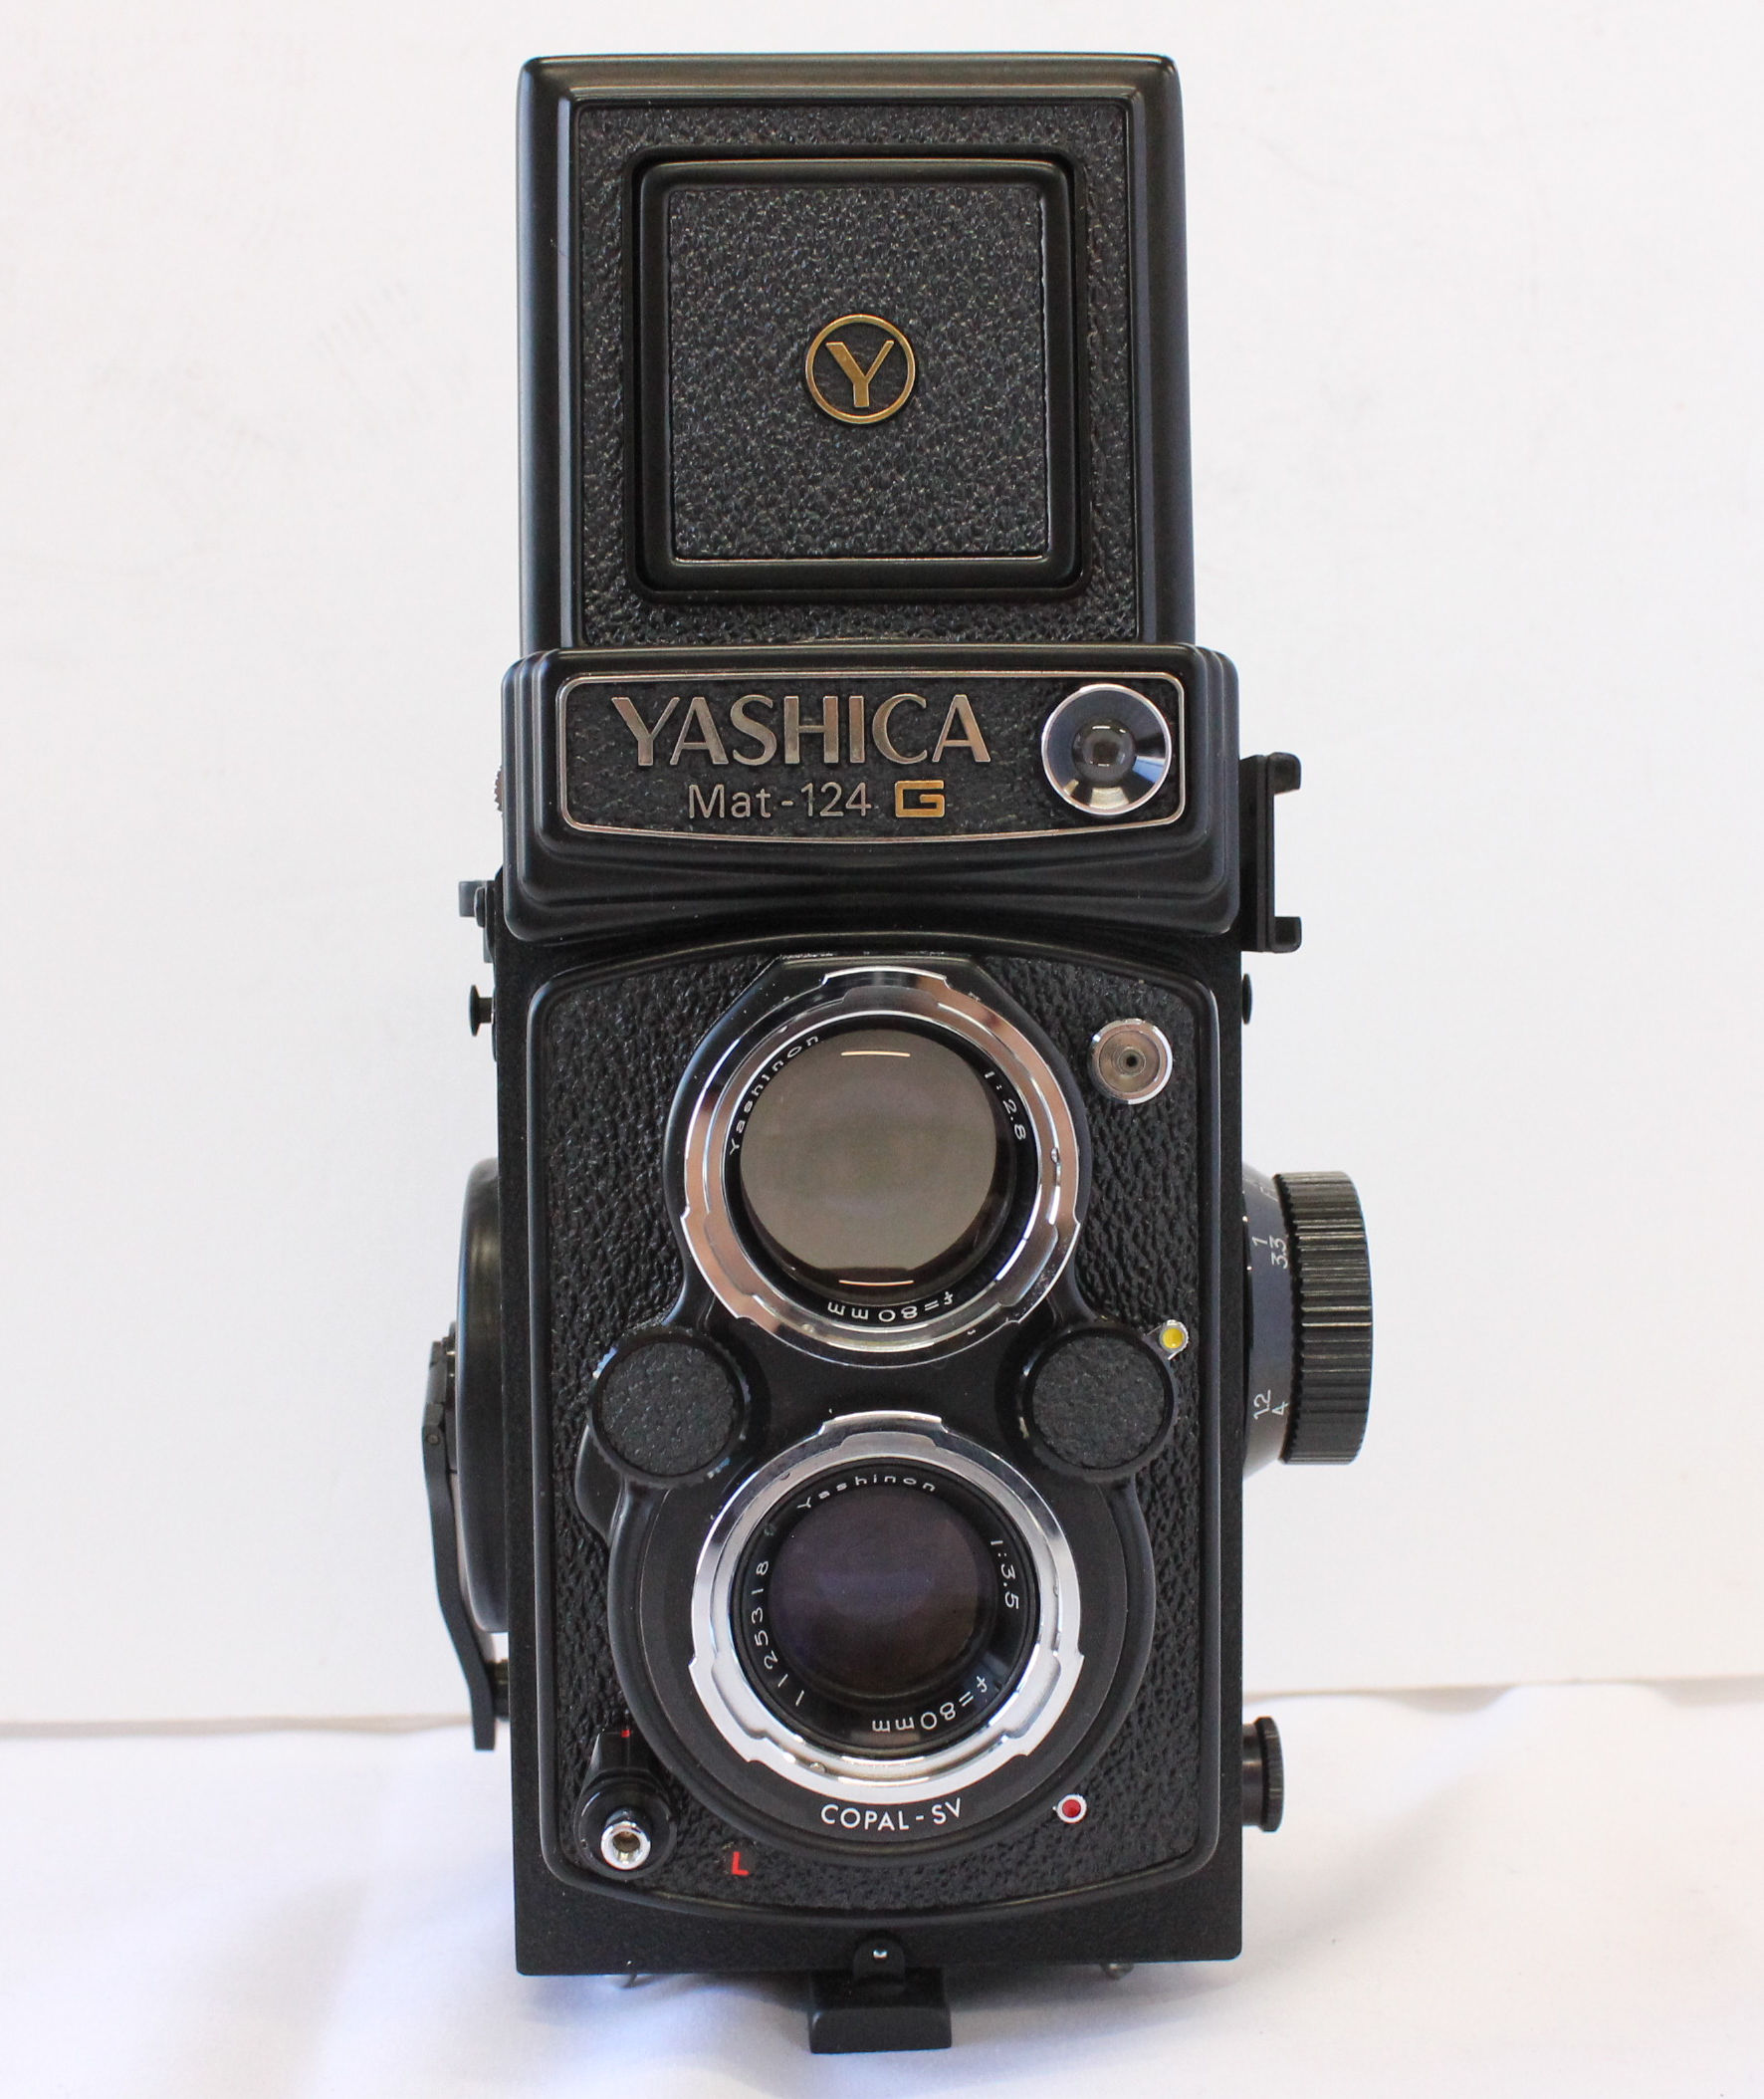  YASHICA MAT 124 G 6x6 TLR Medium Format Camera with 80mm F/3.5 Lens from Japan Photo 10